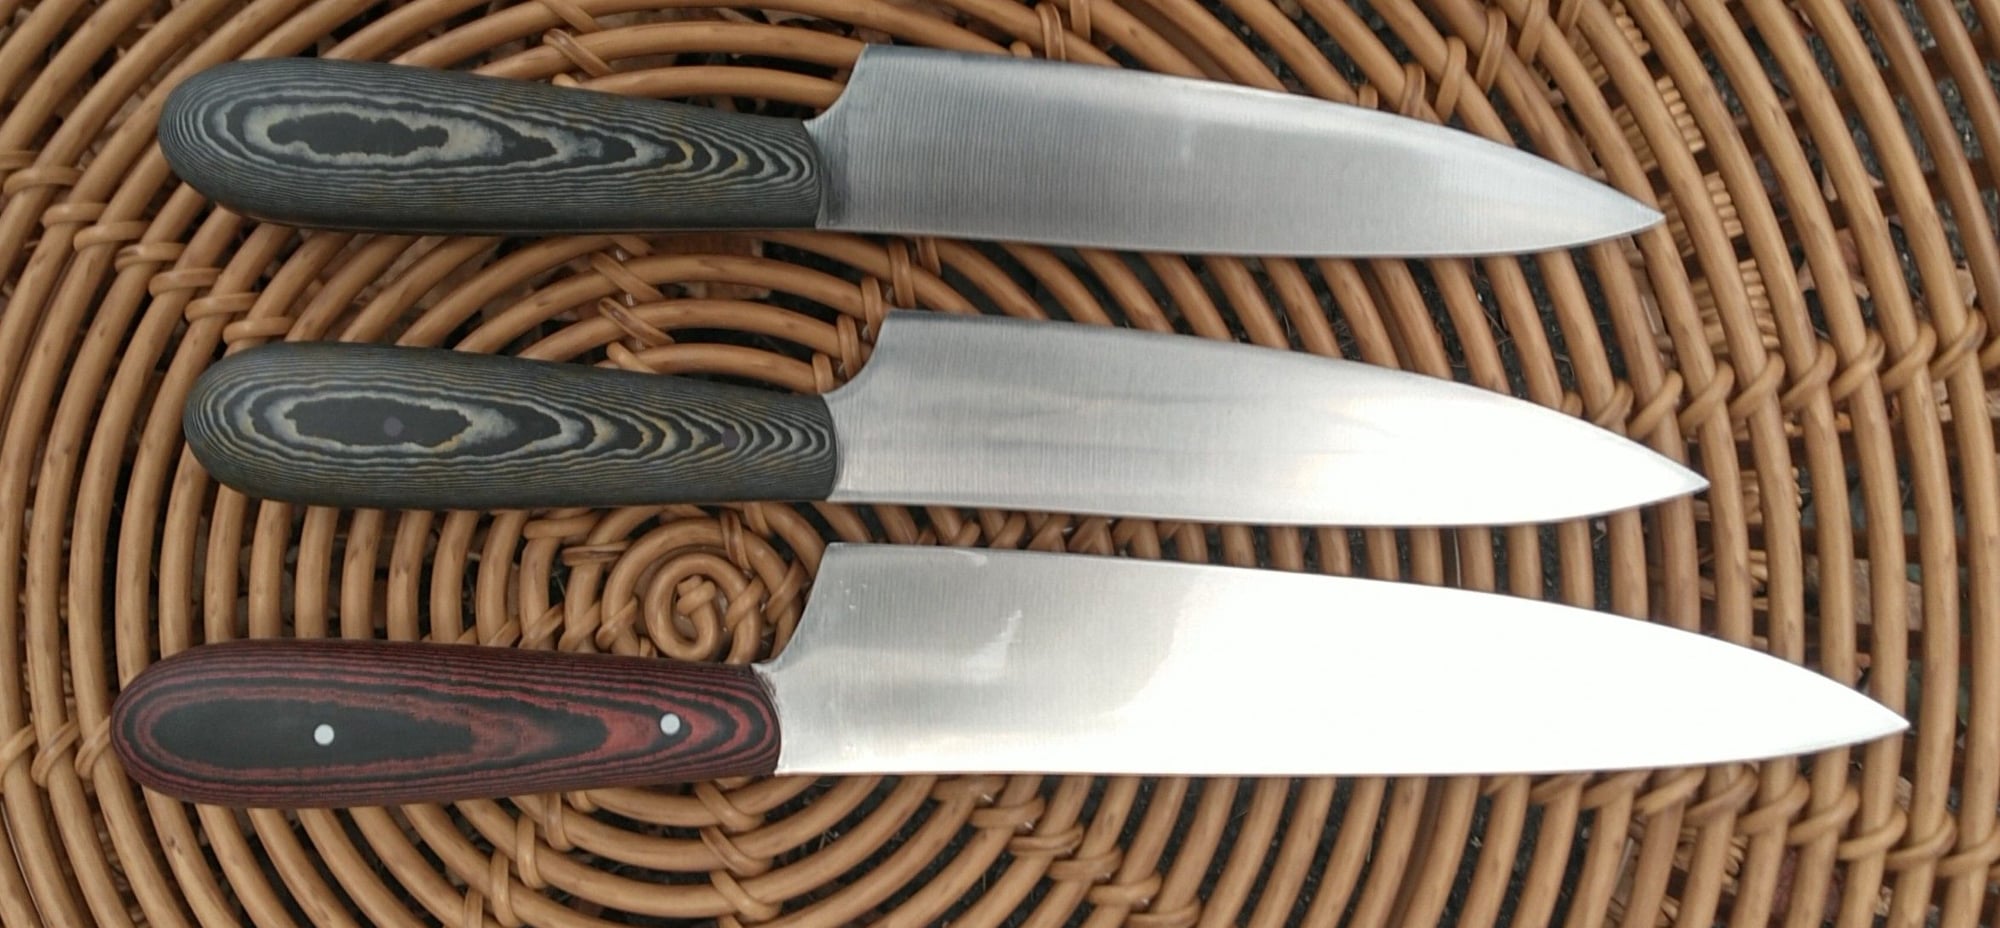 Knives for sale! - Page 2 - The Hull Truth - Boating and Fishing Forum